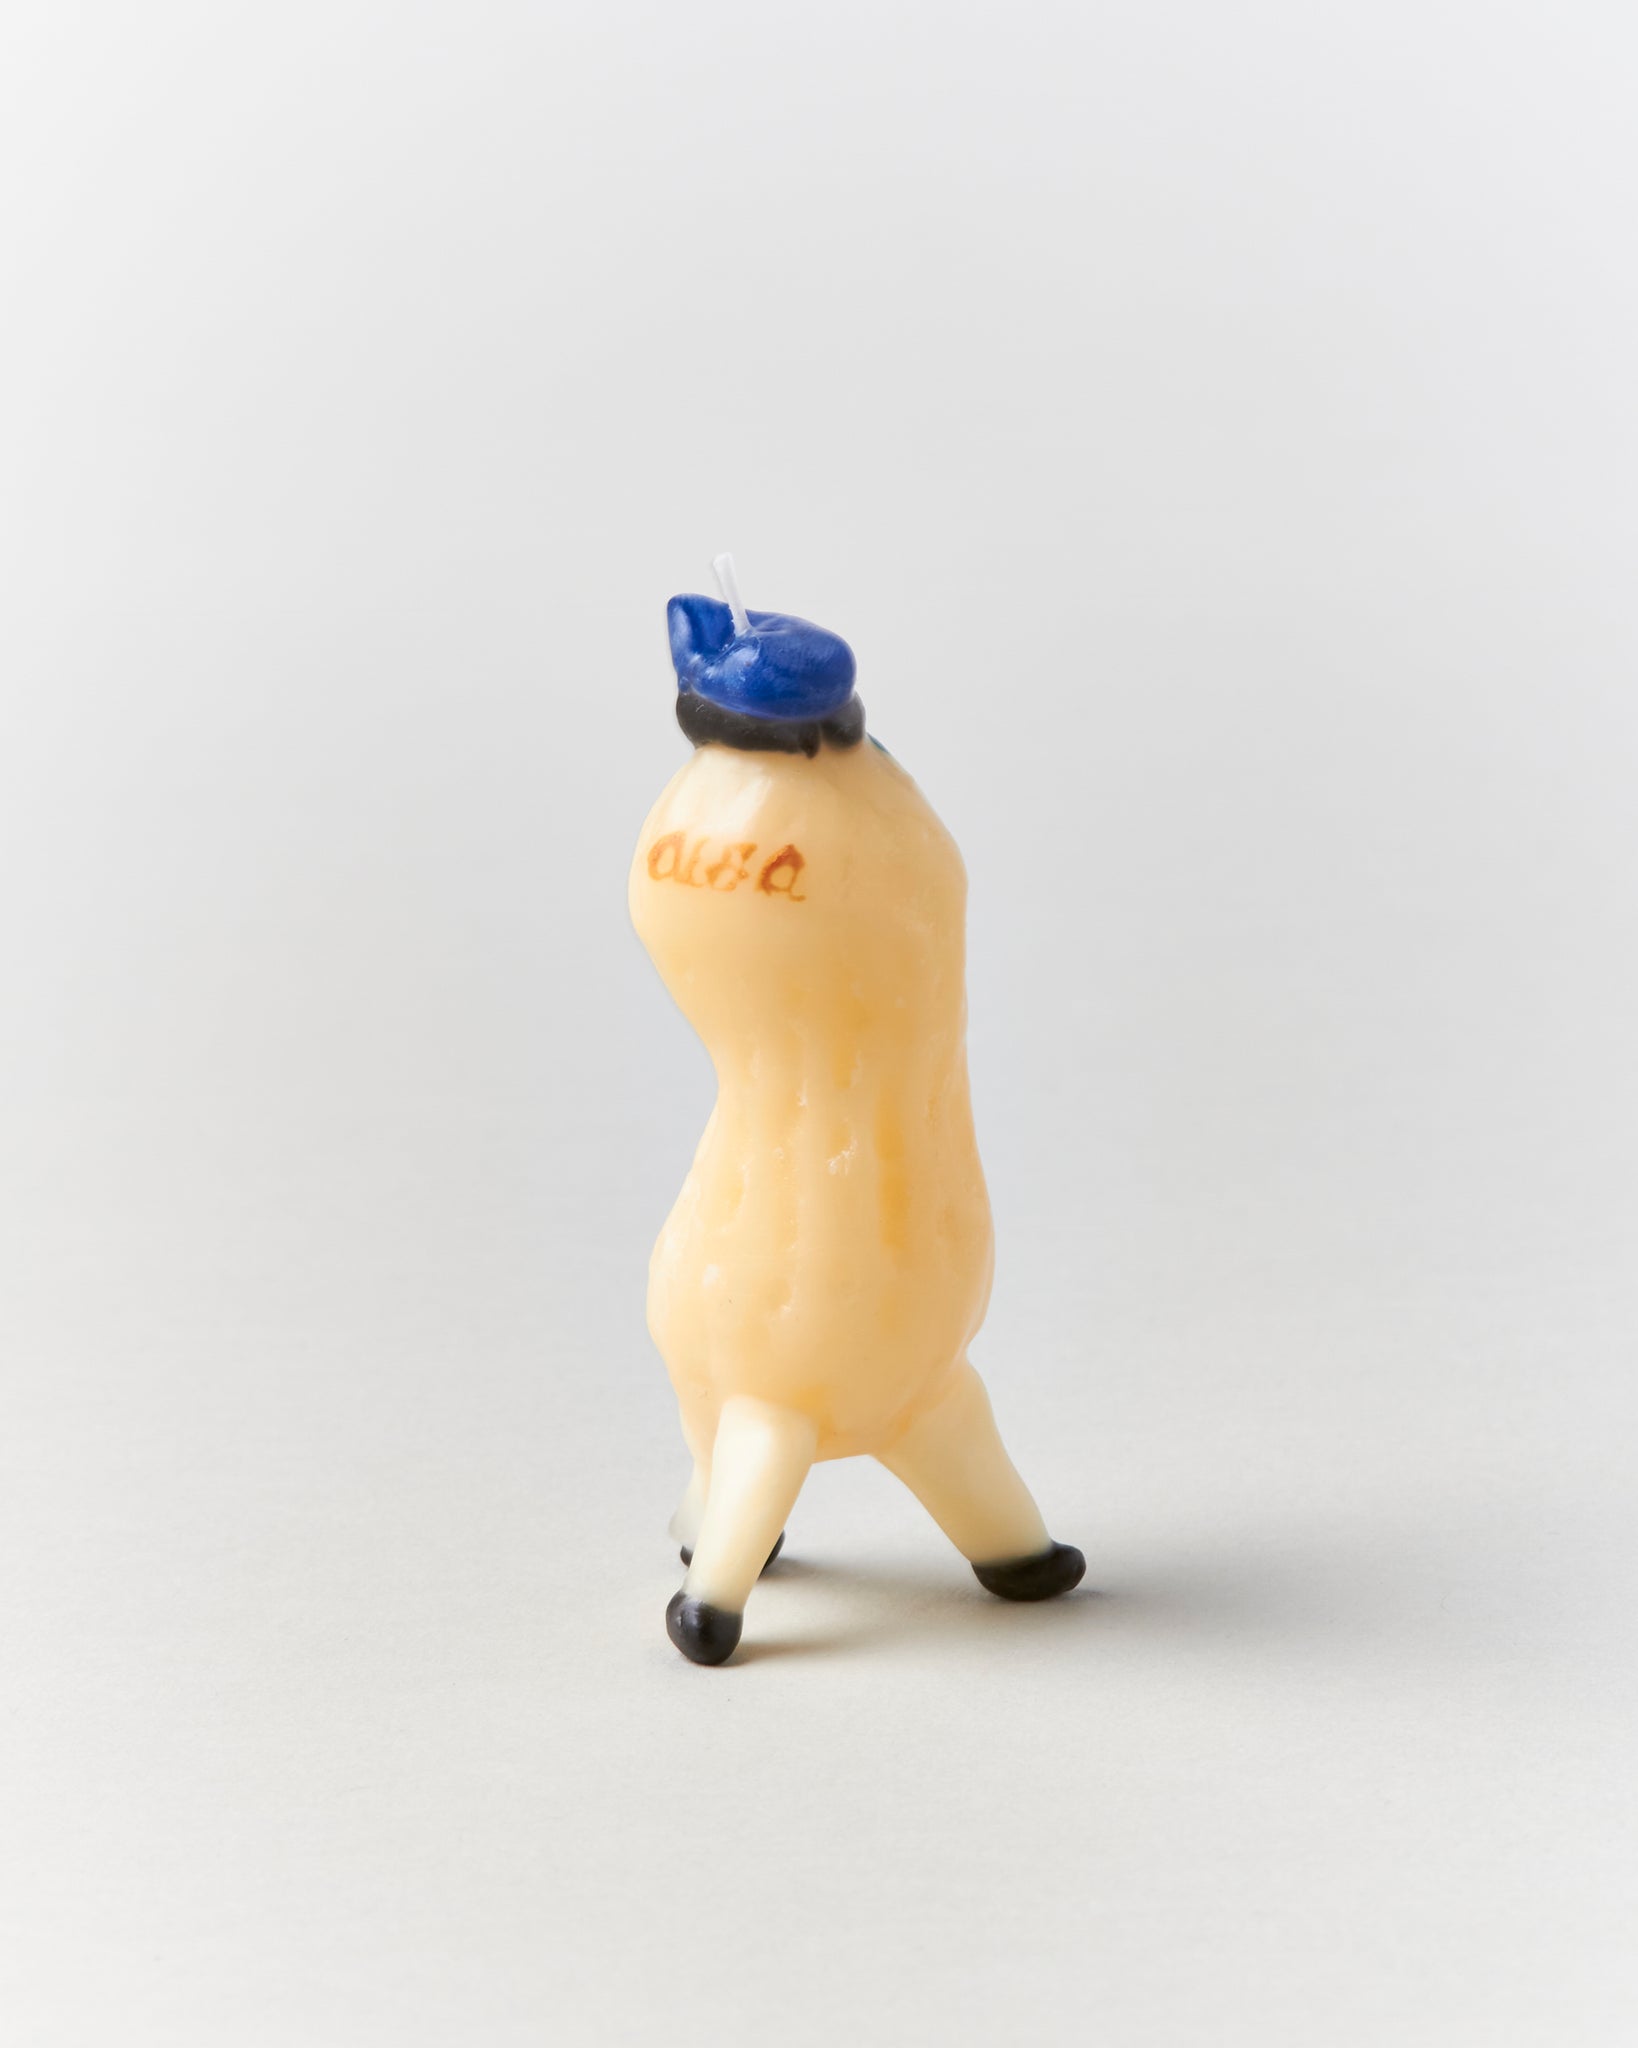 Andy the Peanut Candle